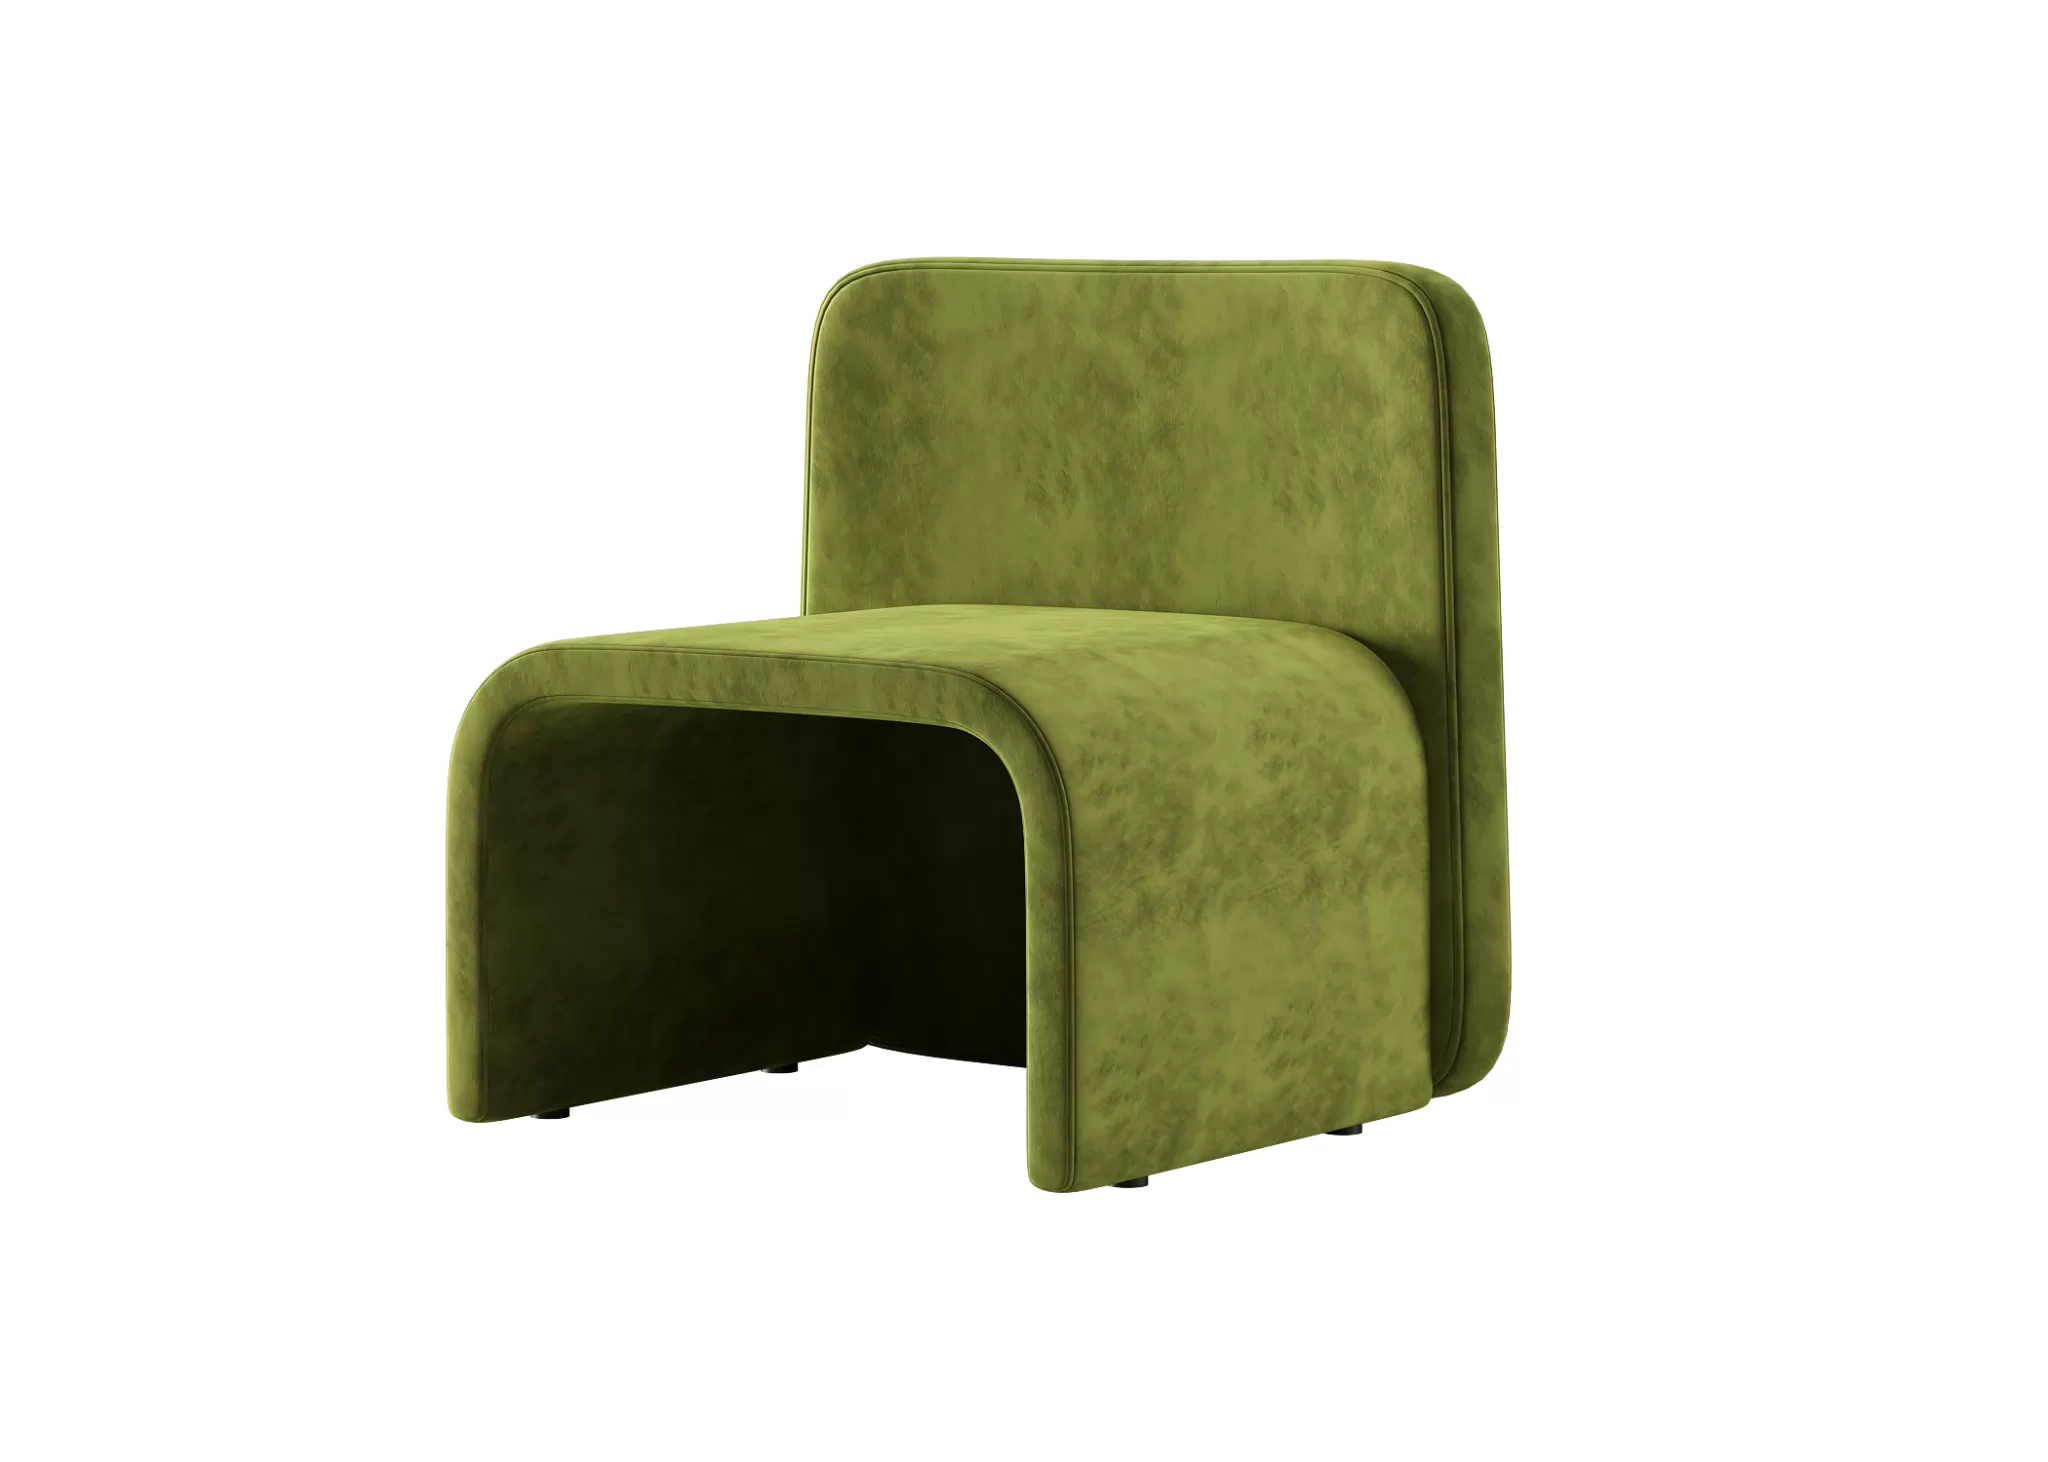 FURNITURE 3D MODELS – CHAIRS – 0095